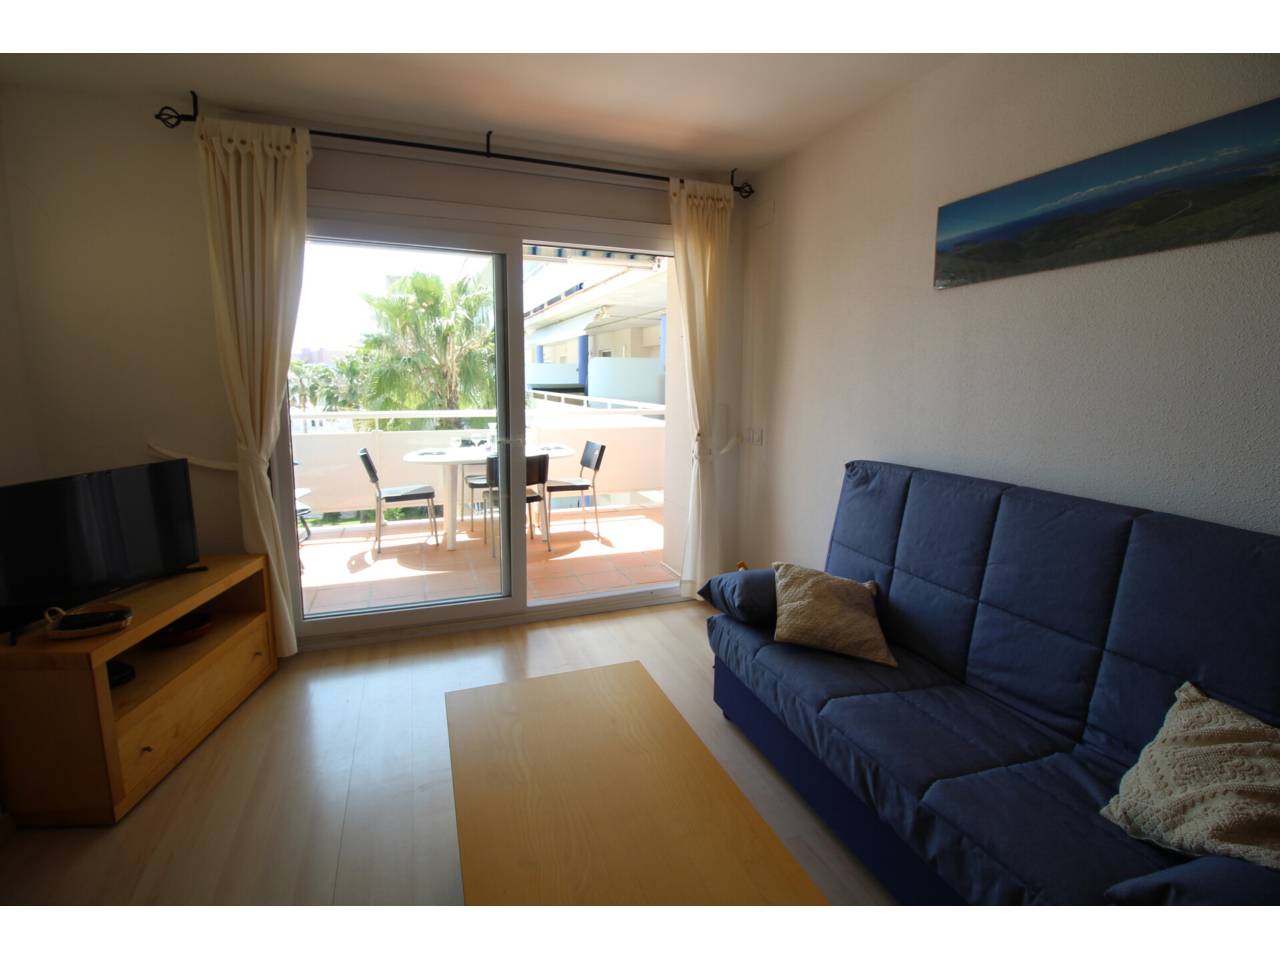 000005 - PORT CANIGÓ Apartment with communal swimming pools and gardens in Santa Margarita